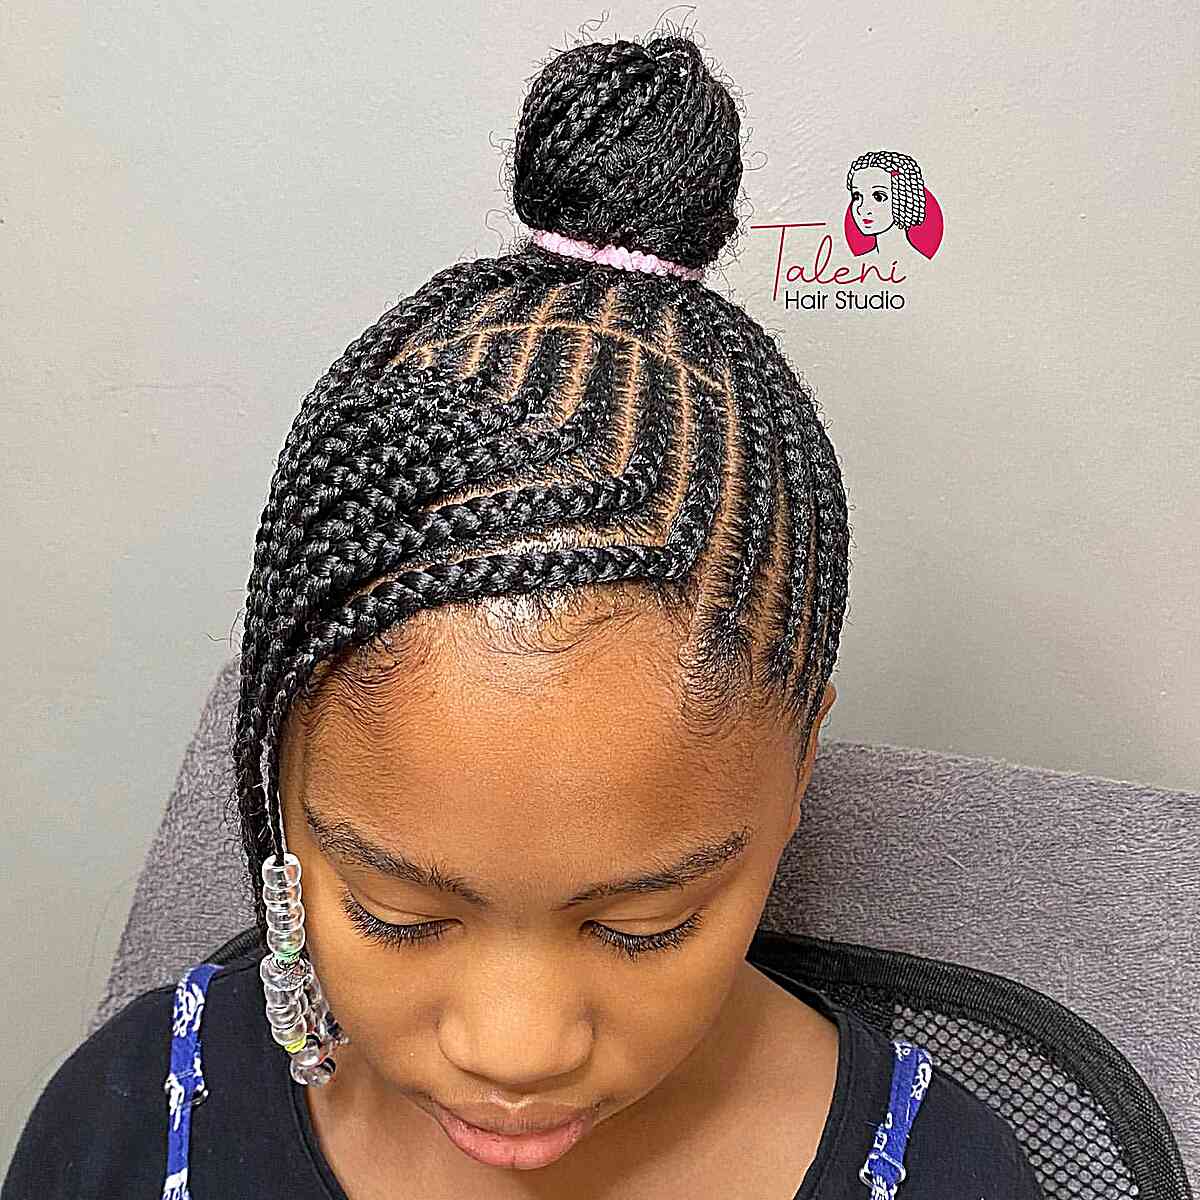 Unique Braided Design for Black Kids with beads and a high bun